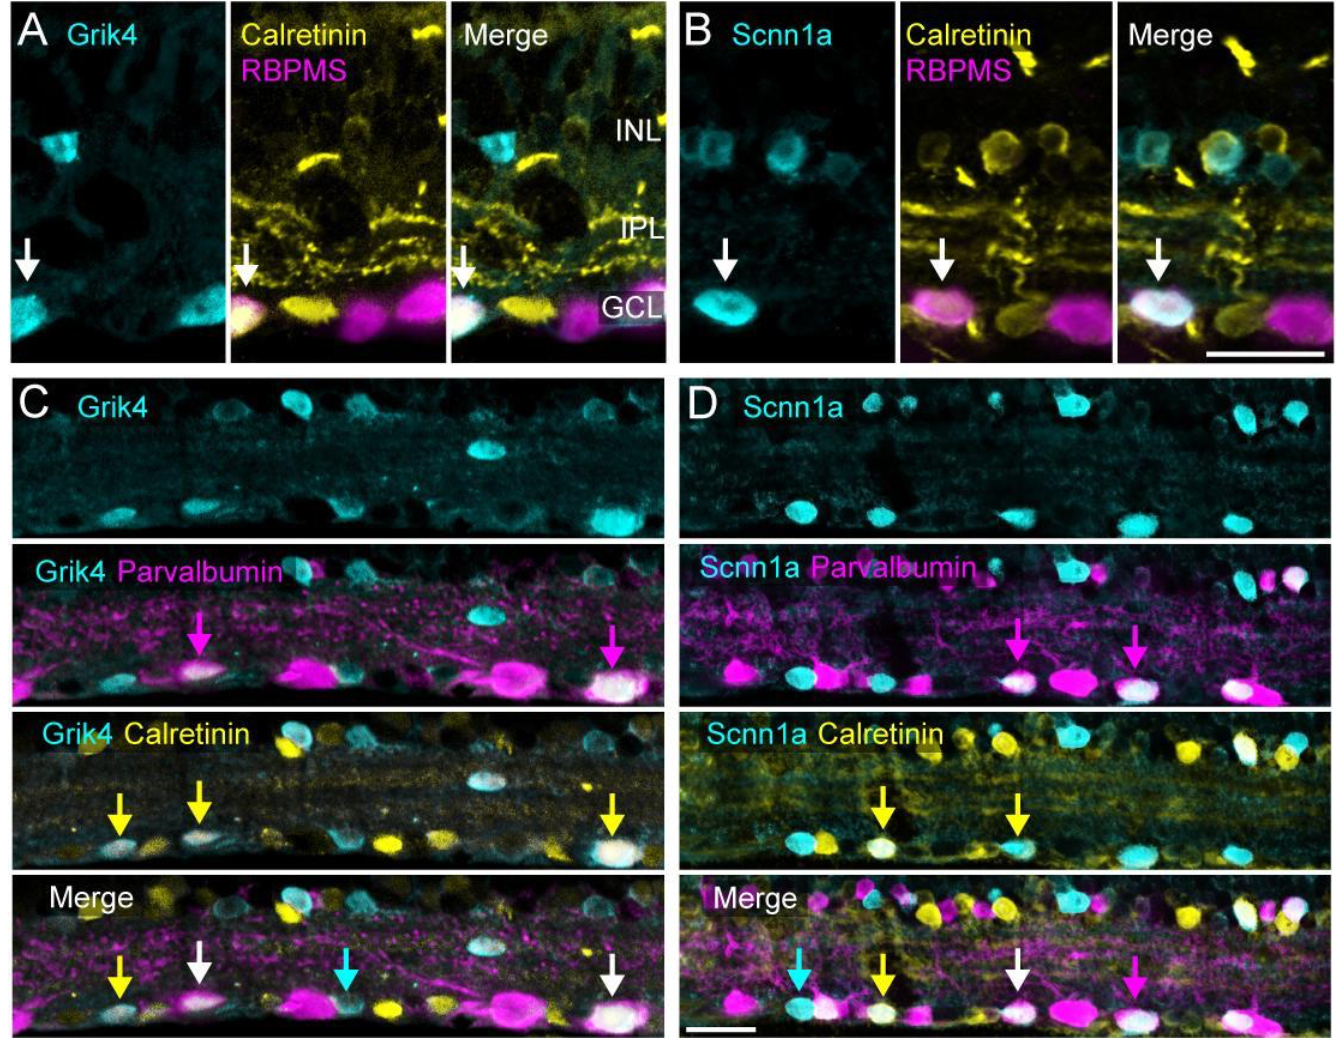 This figure shows experimental results from E. Sernagor lab (performed by G. Hilgen et E. Sernagor) showing how specific genes (Grik4 and Scnn1a) are expressed in mice retina, at the level of Retinal Ganglion Cells types.